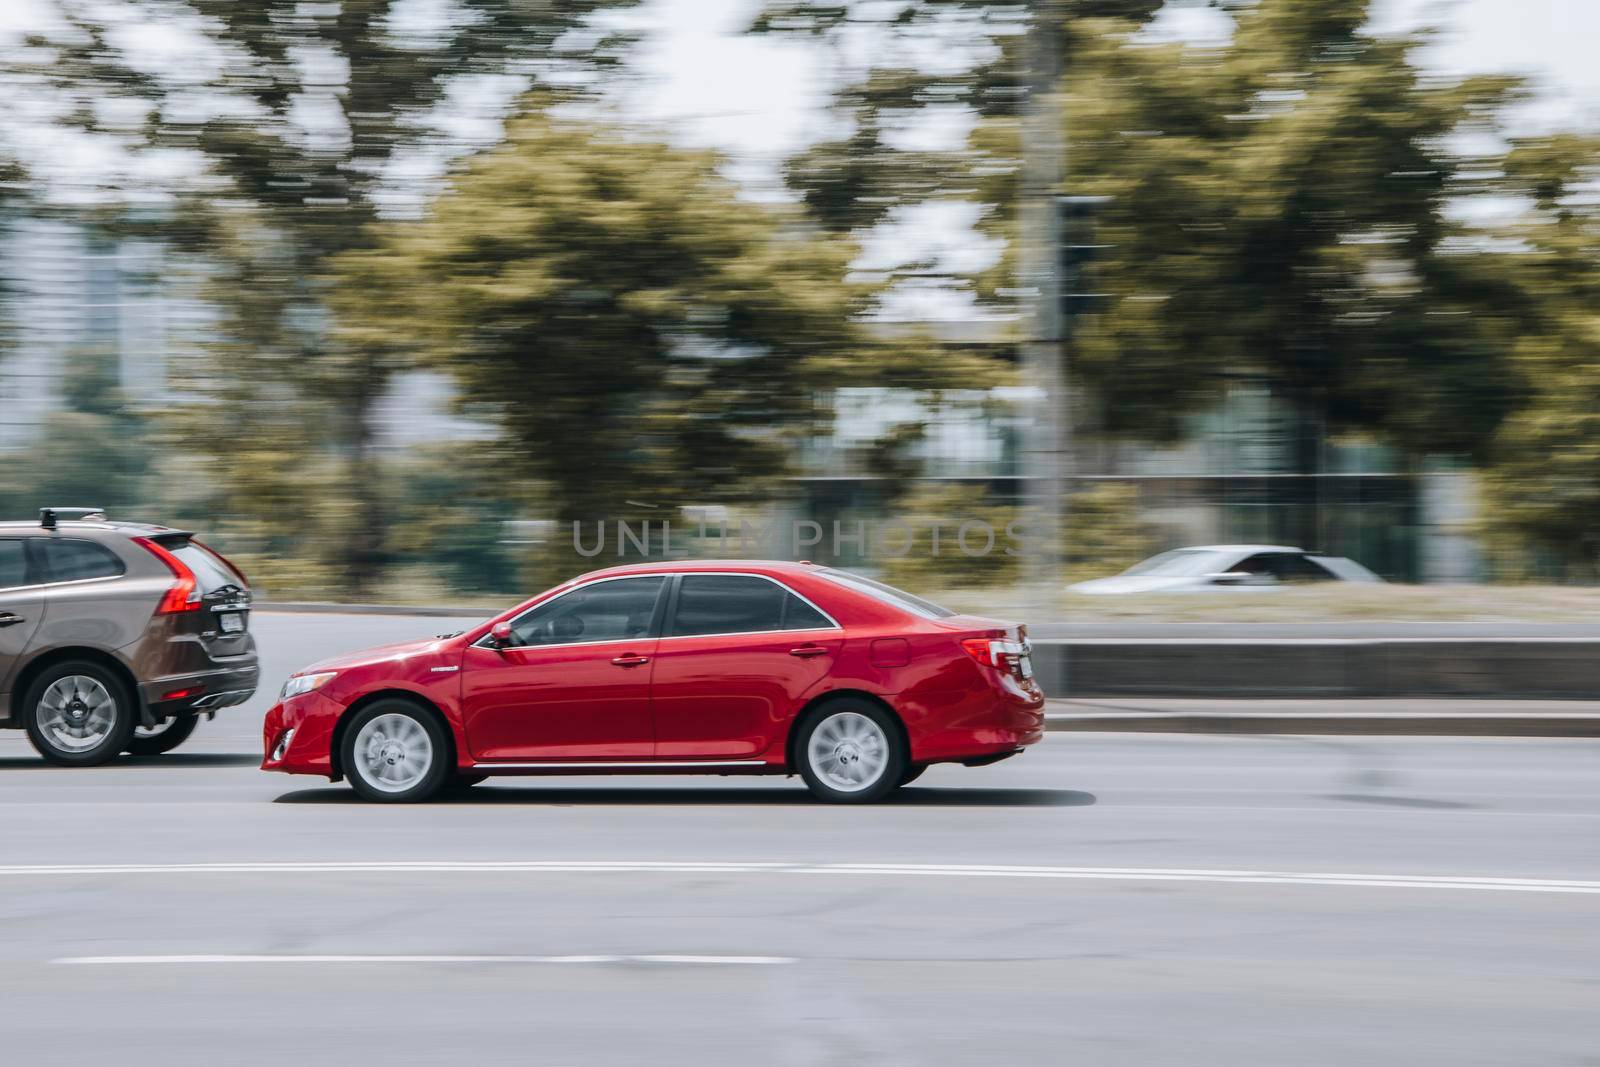 Ukraine, Kyiv - 27 June 2021: Red Toyota Camry car moving on the street. Editorial